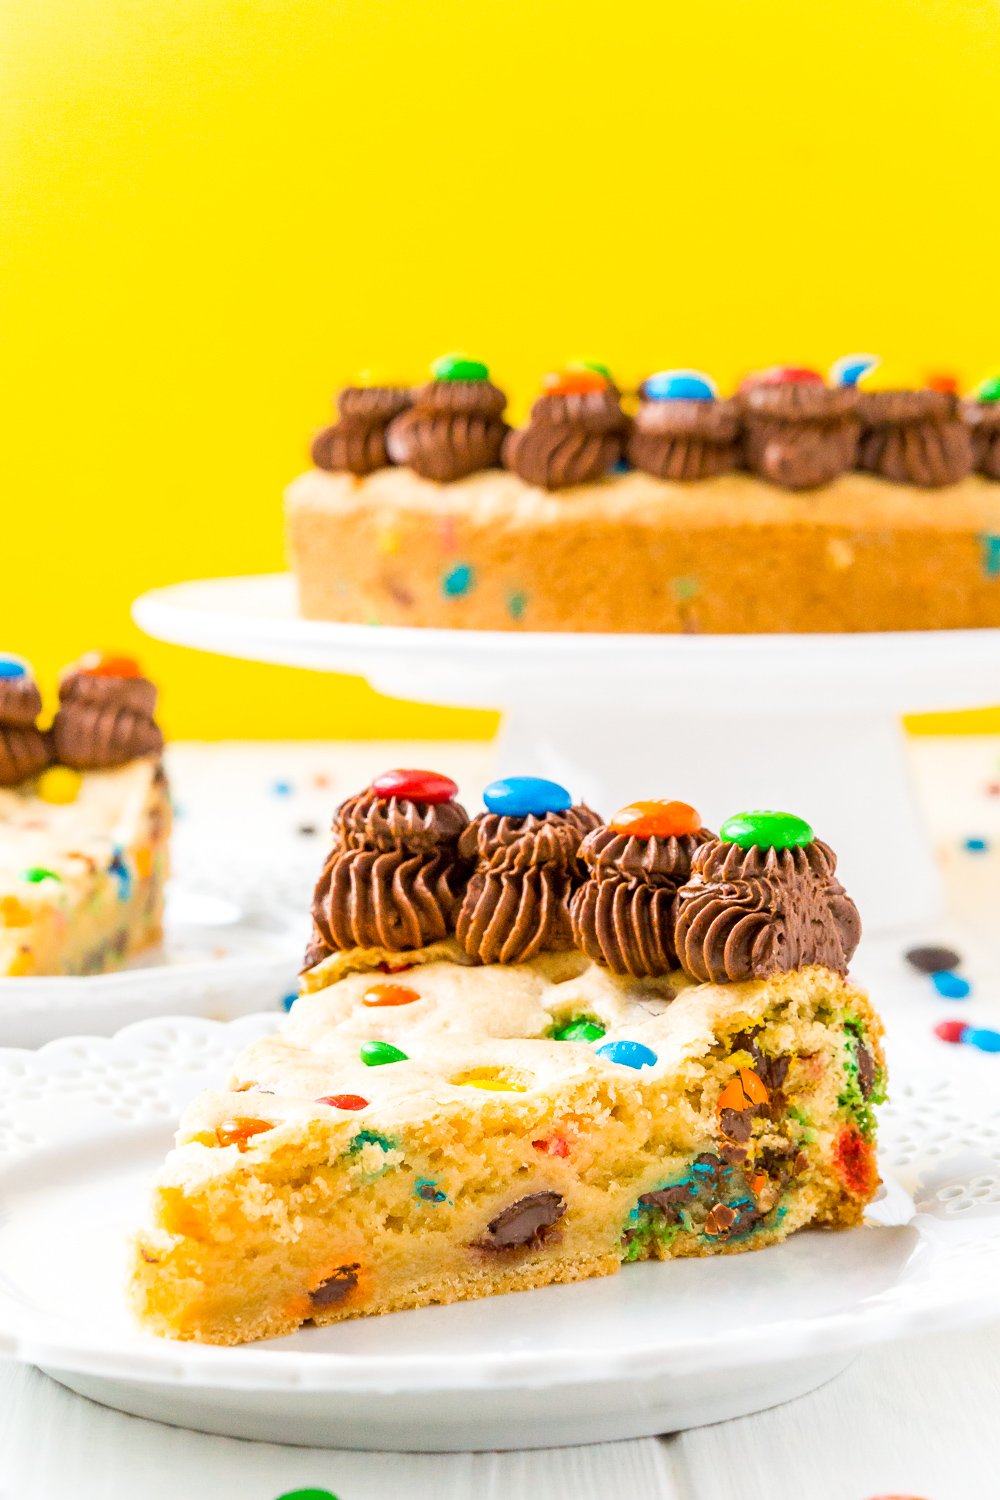 Slice of M&M's Cookie Cake on white plate with rest of cake in the background.